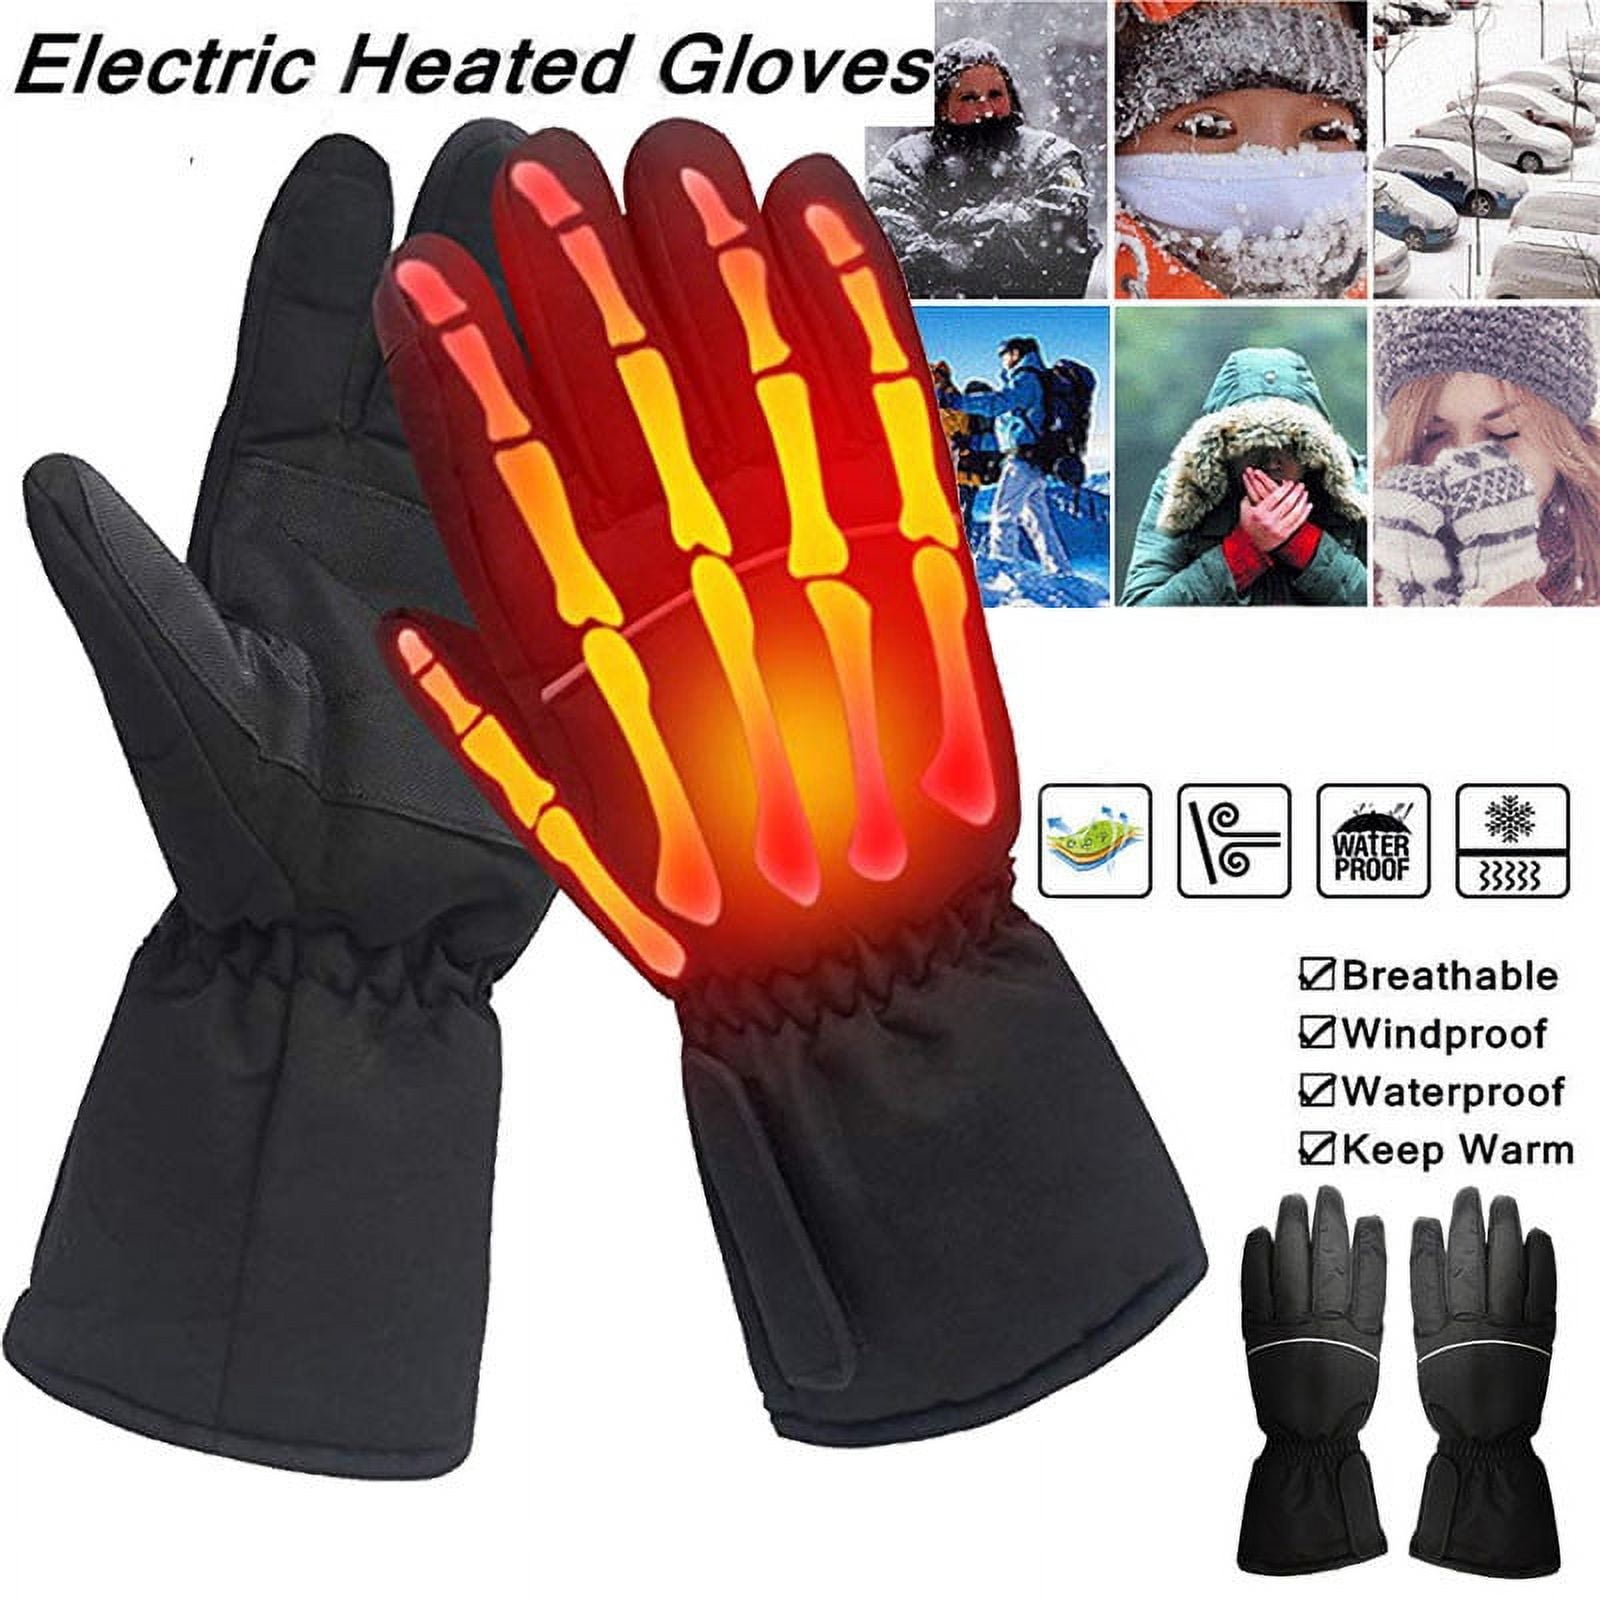 Menard Winter Electric Heated Gloves for Men Women Electric Gloves Battery Powered Heating Gloves, Women's, Size: One size, Black